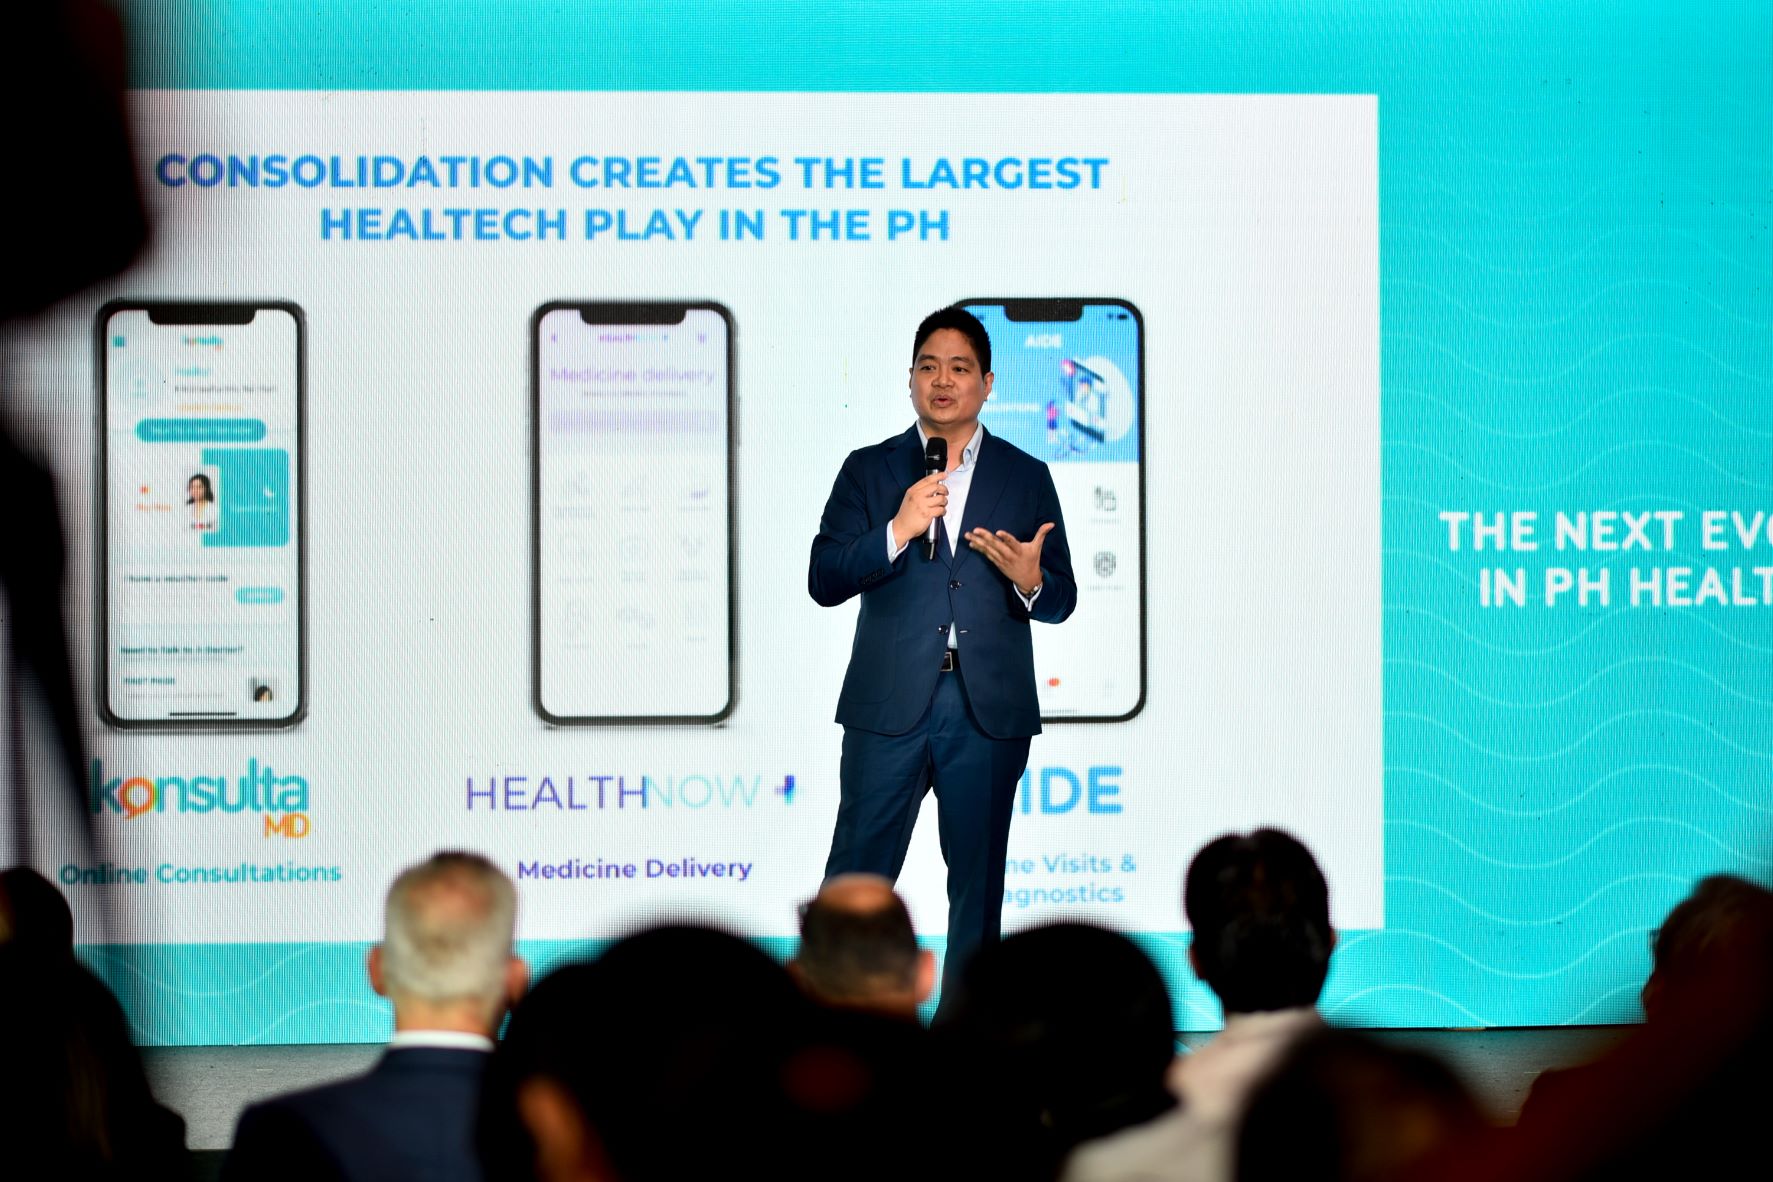 KonsultaMD CEO Cholo Tagaysay speaks at the closing event for the consolidation of KonsultaMD, HealthNow and AIDE, three of the country’s market-leading digital health apps merging their services into one superapp to provide seamless healthcare services for Filipinos.